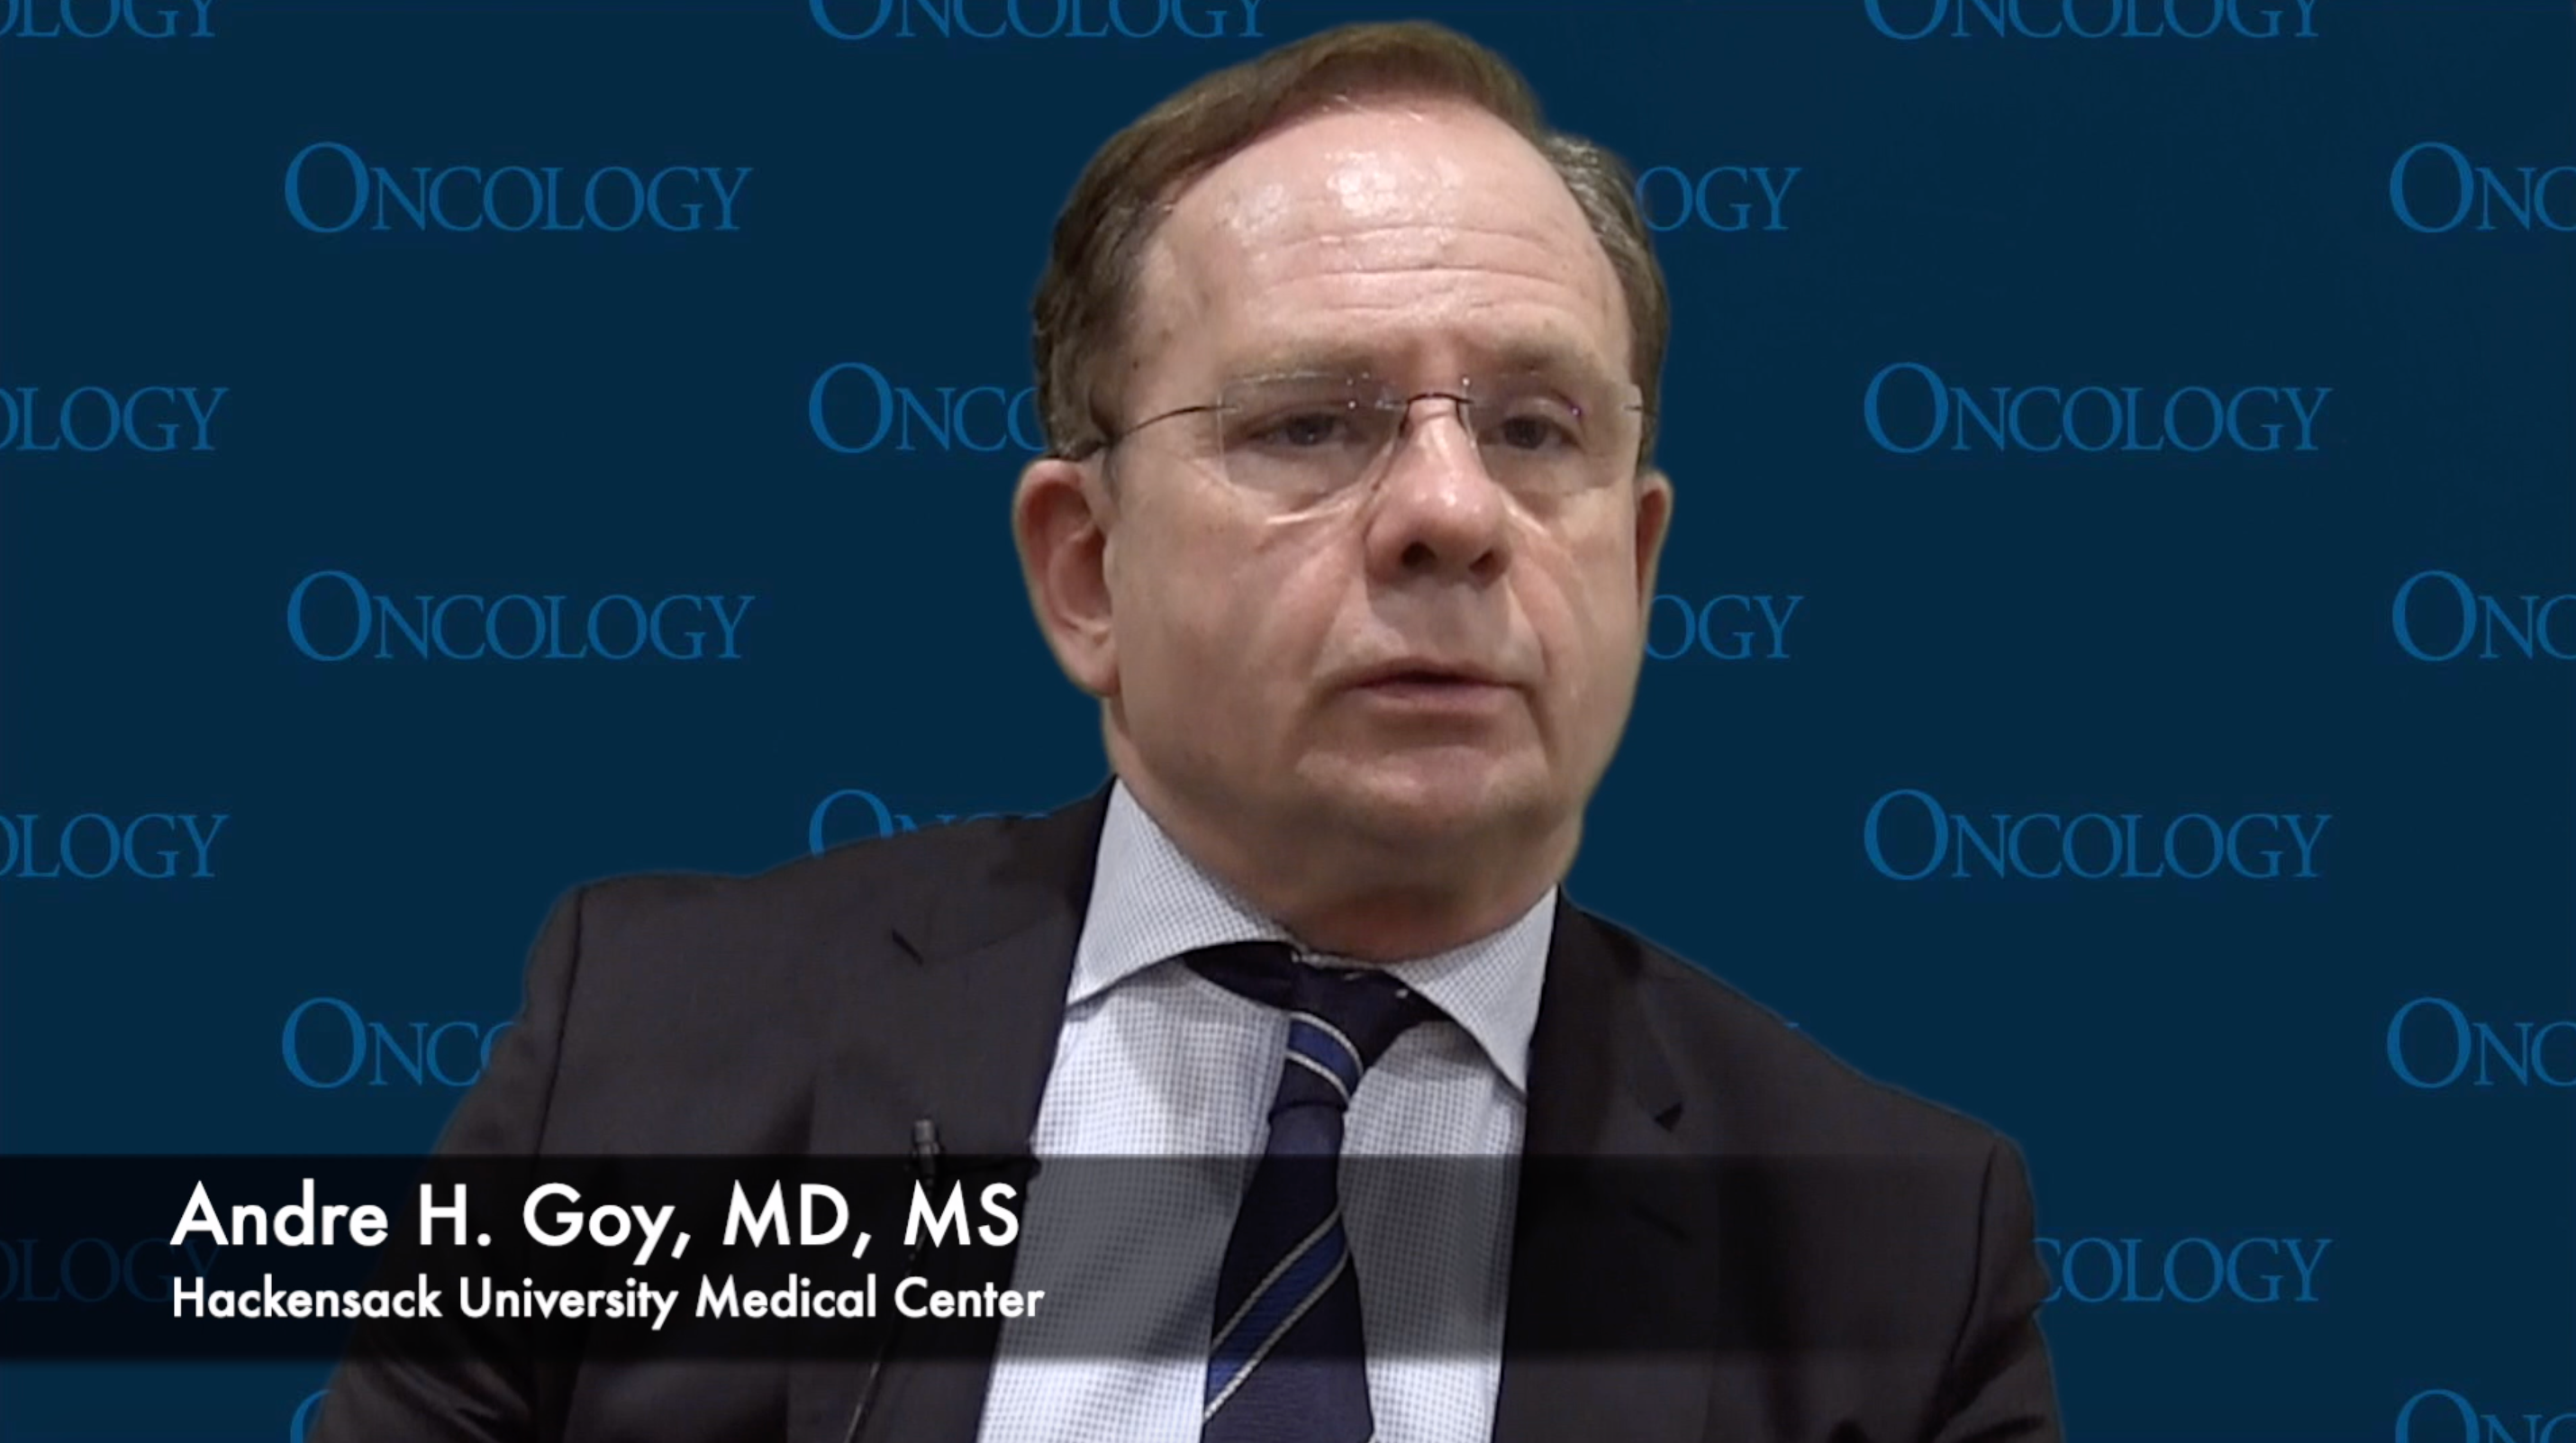 Andre H. Goy, MD, MS, Discusses Extending Survival for Patients with DLBCL